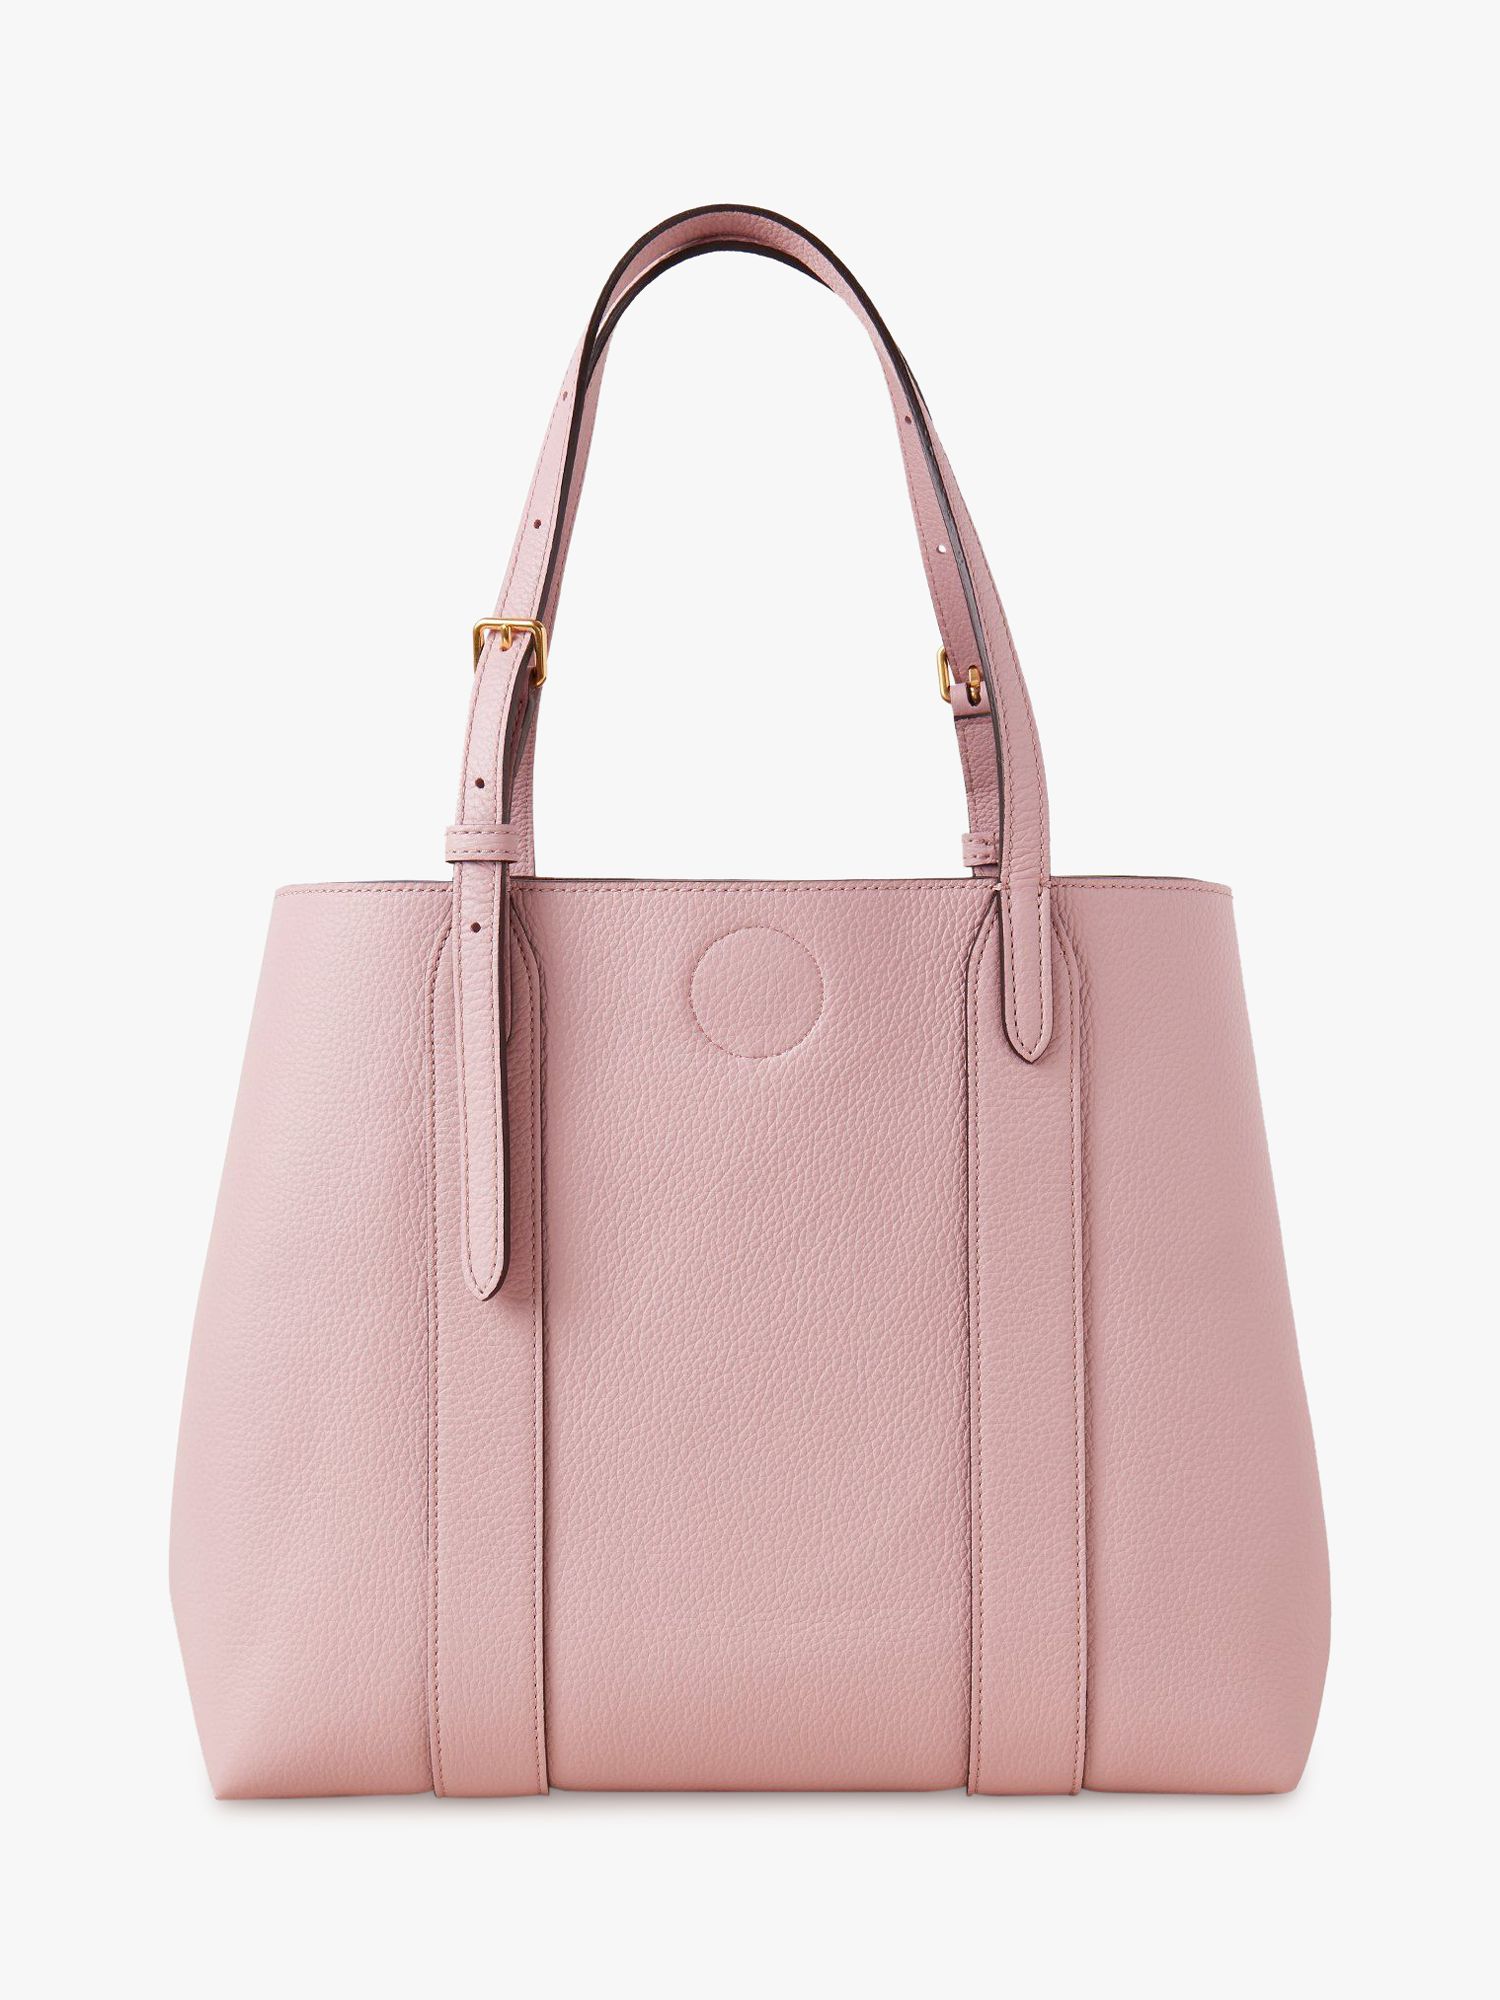 Mulberry Small Bayswater Classic Grain Leather Tote Bag, Powder Pink at John Lewis & Partners